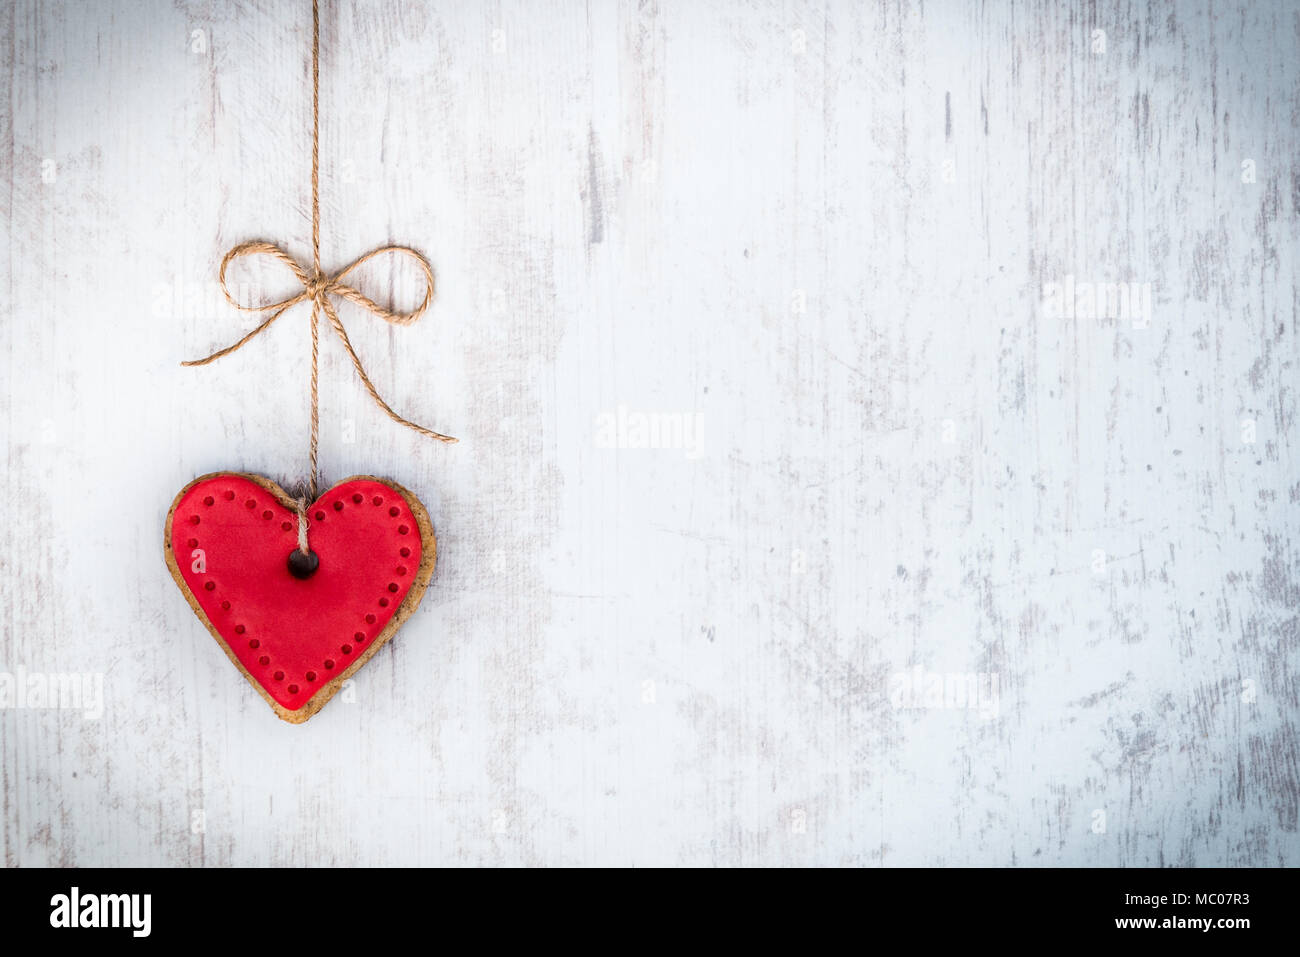 Valentines day concept. Heart shaped cookie tied with hemp bow over white wood rustic background. Stock Photo